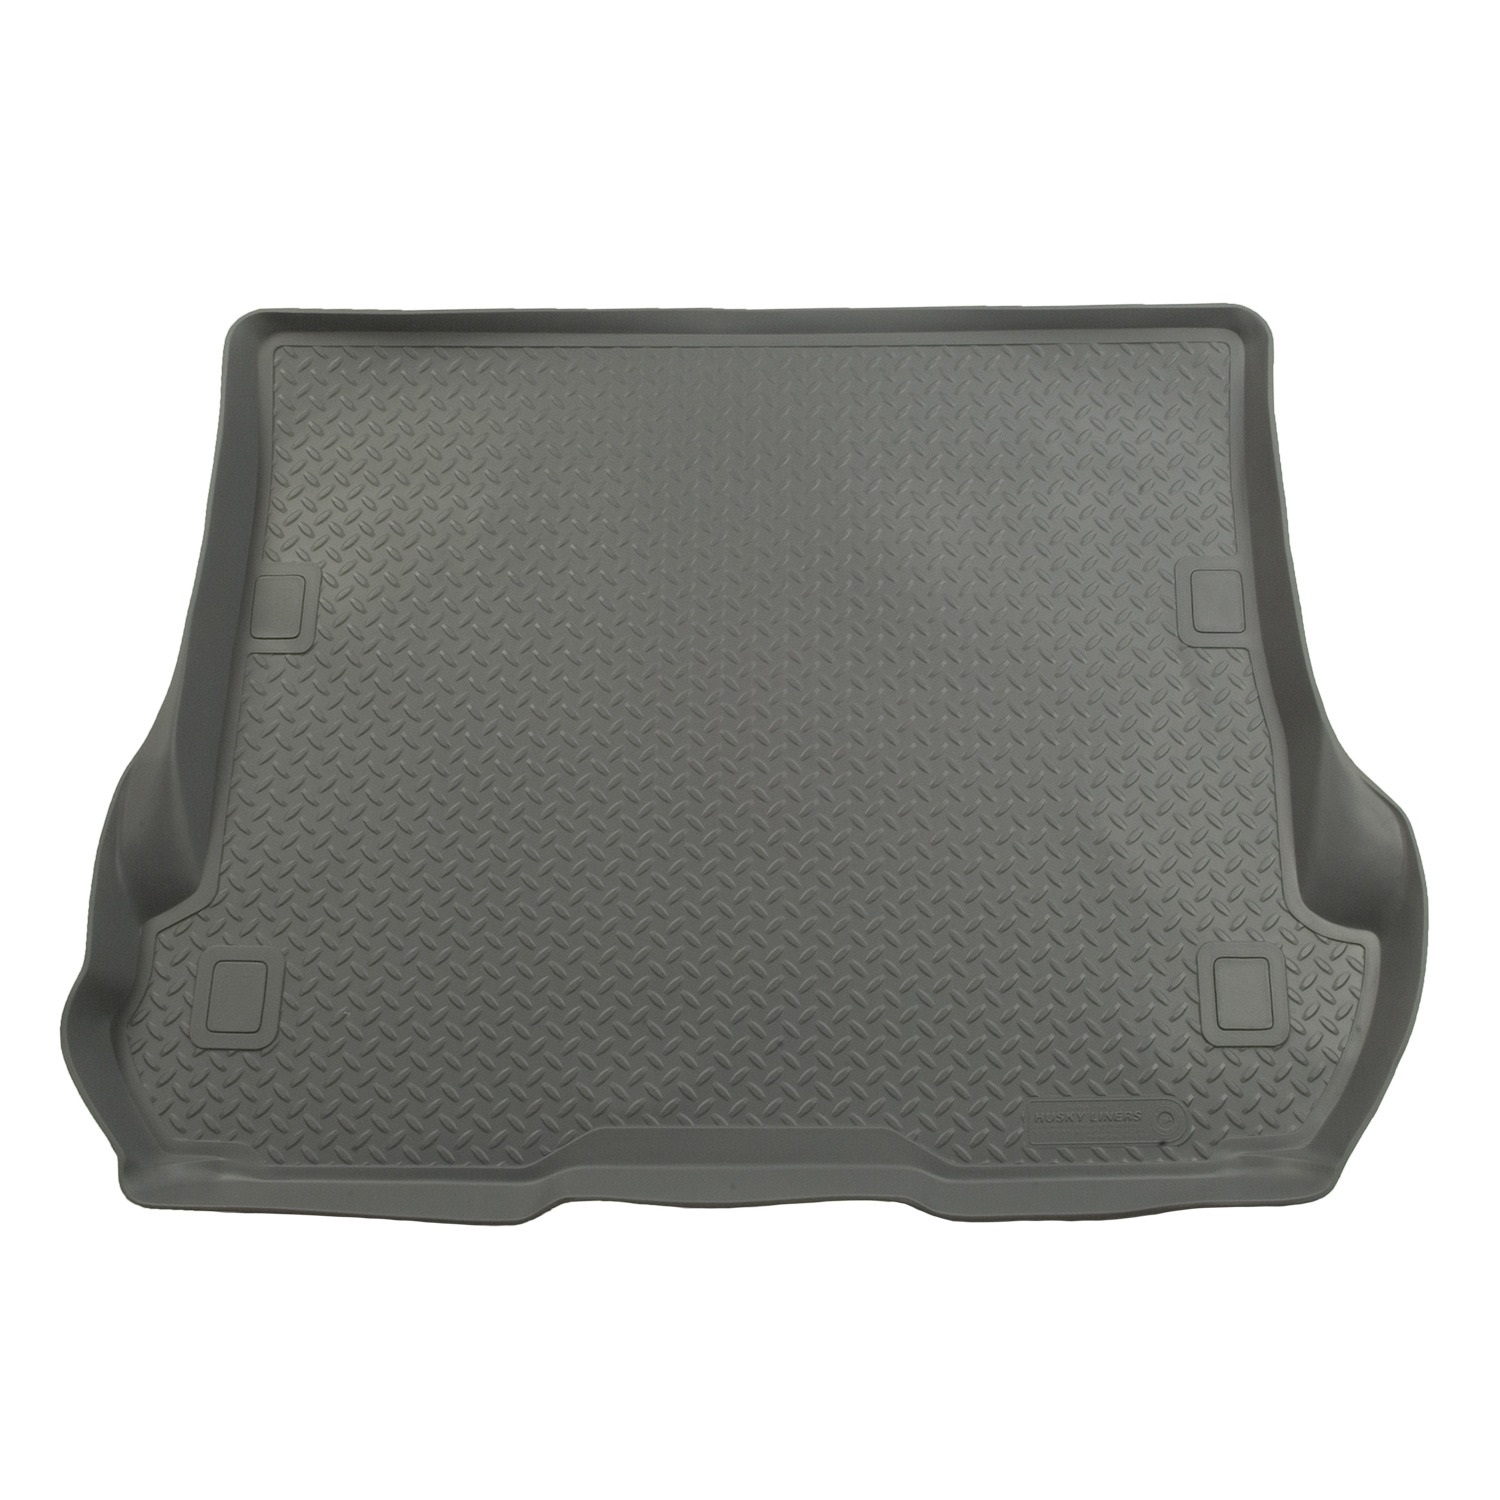 Husky Liners Husky Liners 25882 Classic Style; Cargo Liner Fits 08-13 Highlander